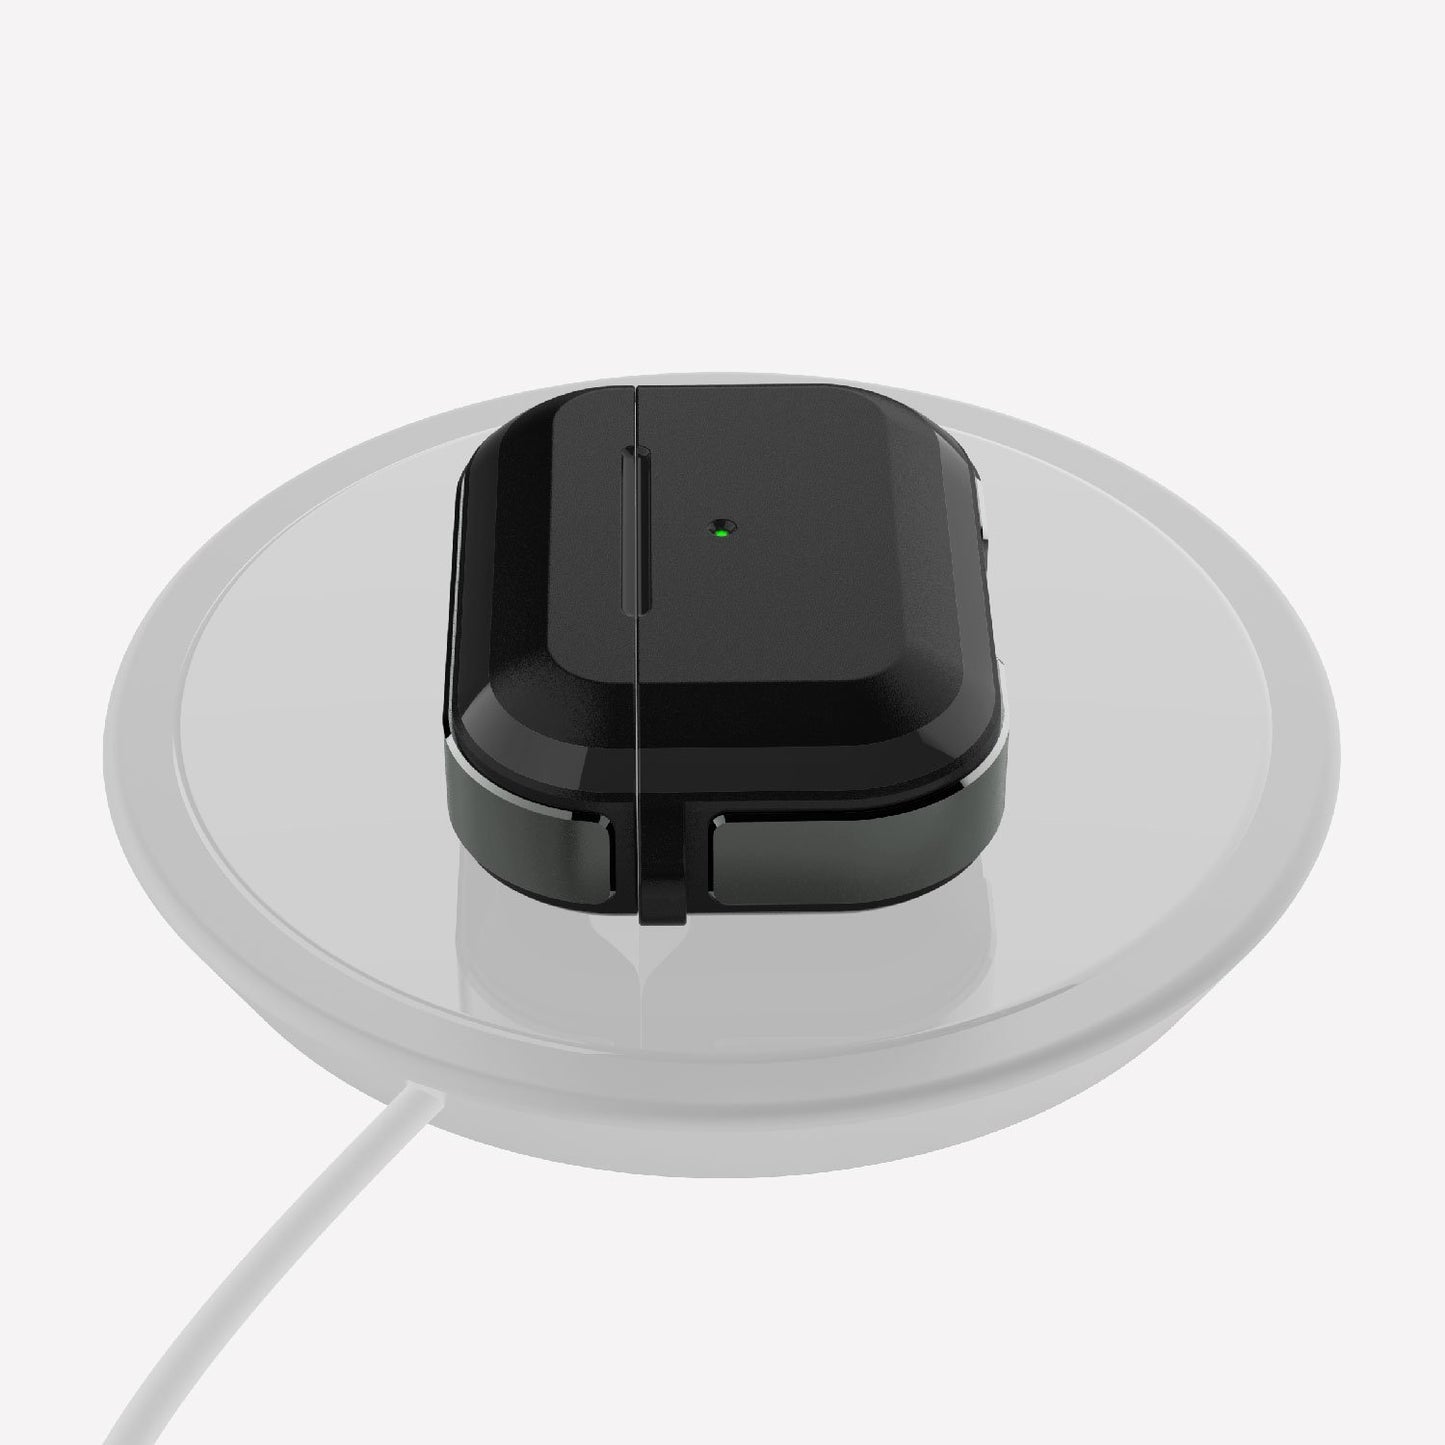 A black wireless charger is sitting on top of a white surface, providing convenient wireless charging for devices such as Raptic Apple AirPods Pro Case - TREK.